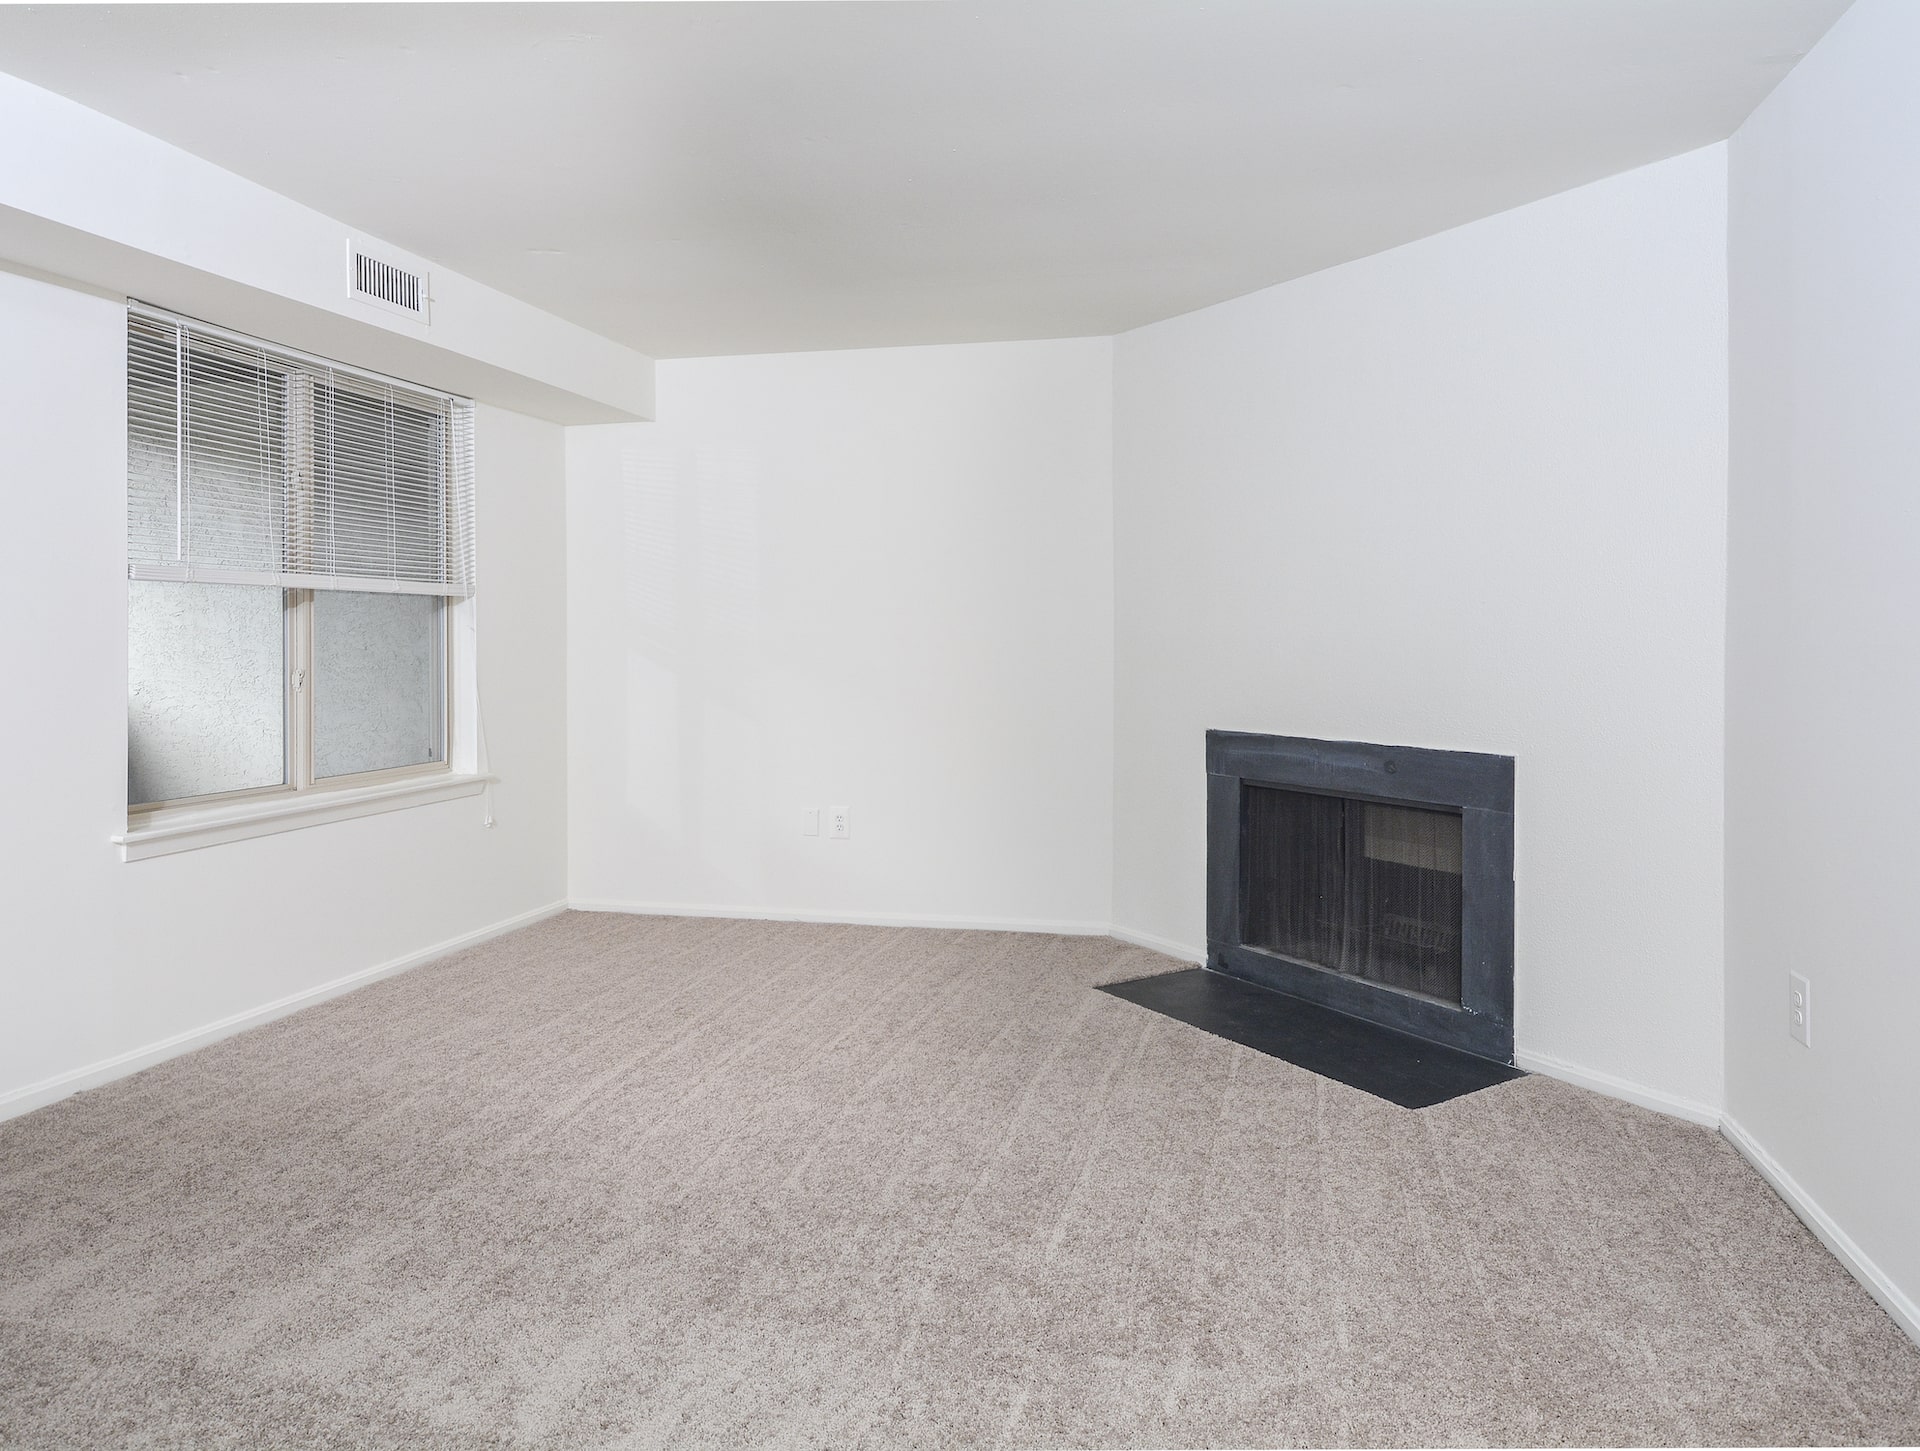 Bedroom area of an apartment unfurnished, fitted with carpet flooring, and a fire place